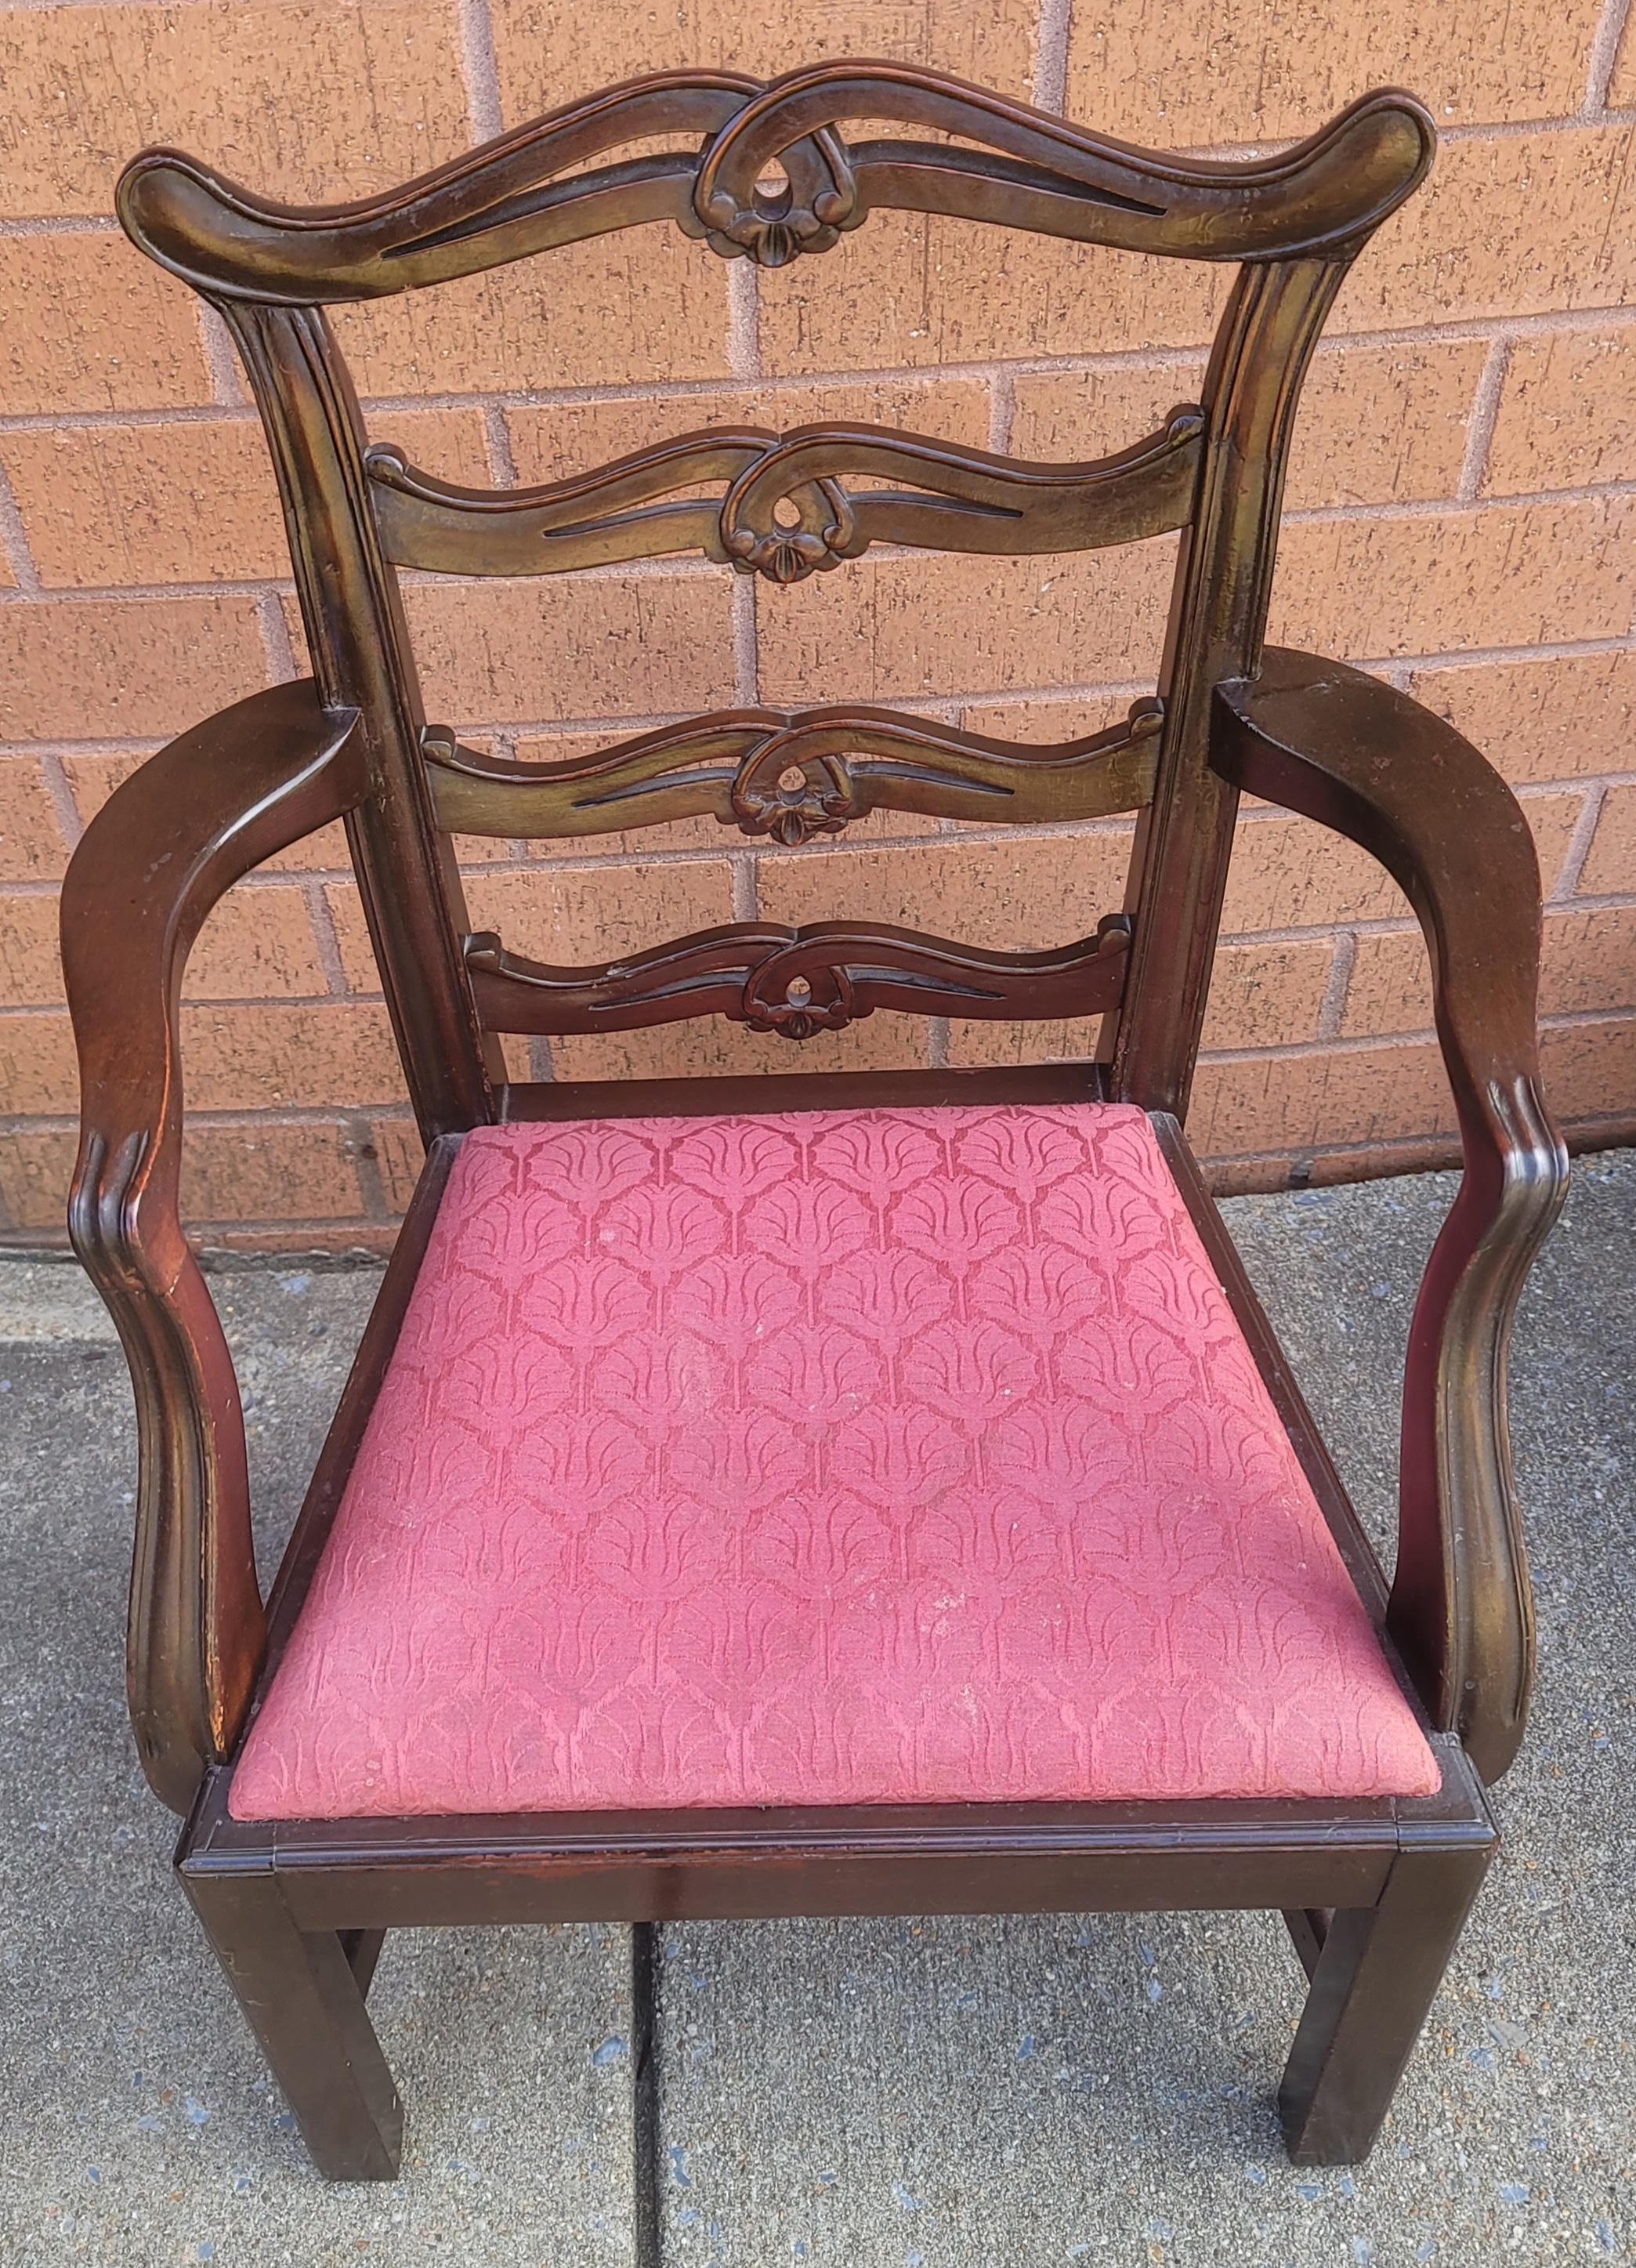 George III Style Pierced Ladder back mahogany & upholstered seat child armchair. Very solid construction. Not just for decorative purpose only, but for use as well.